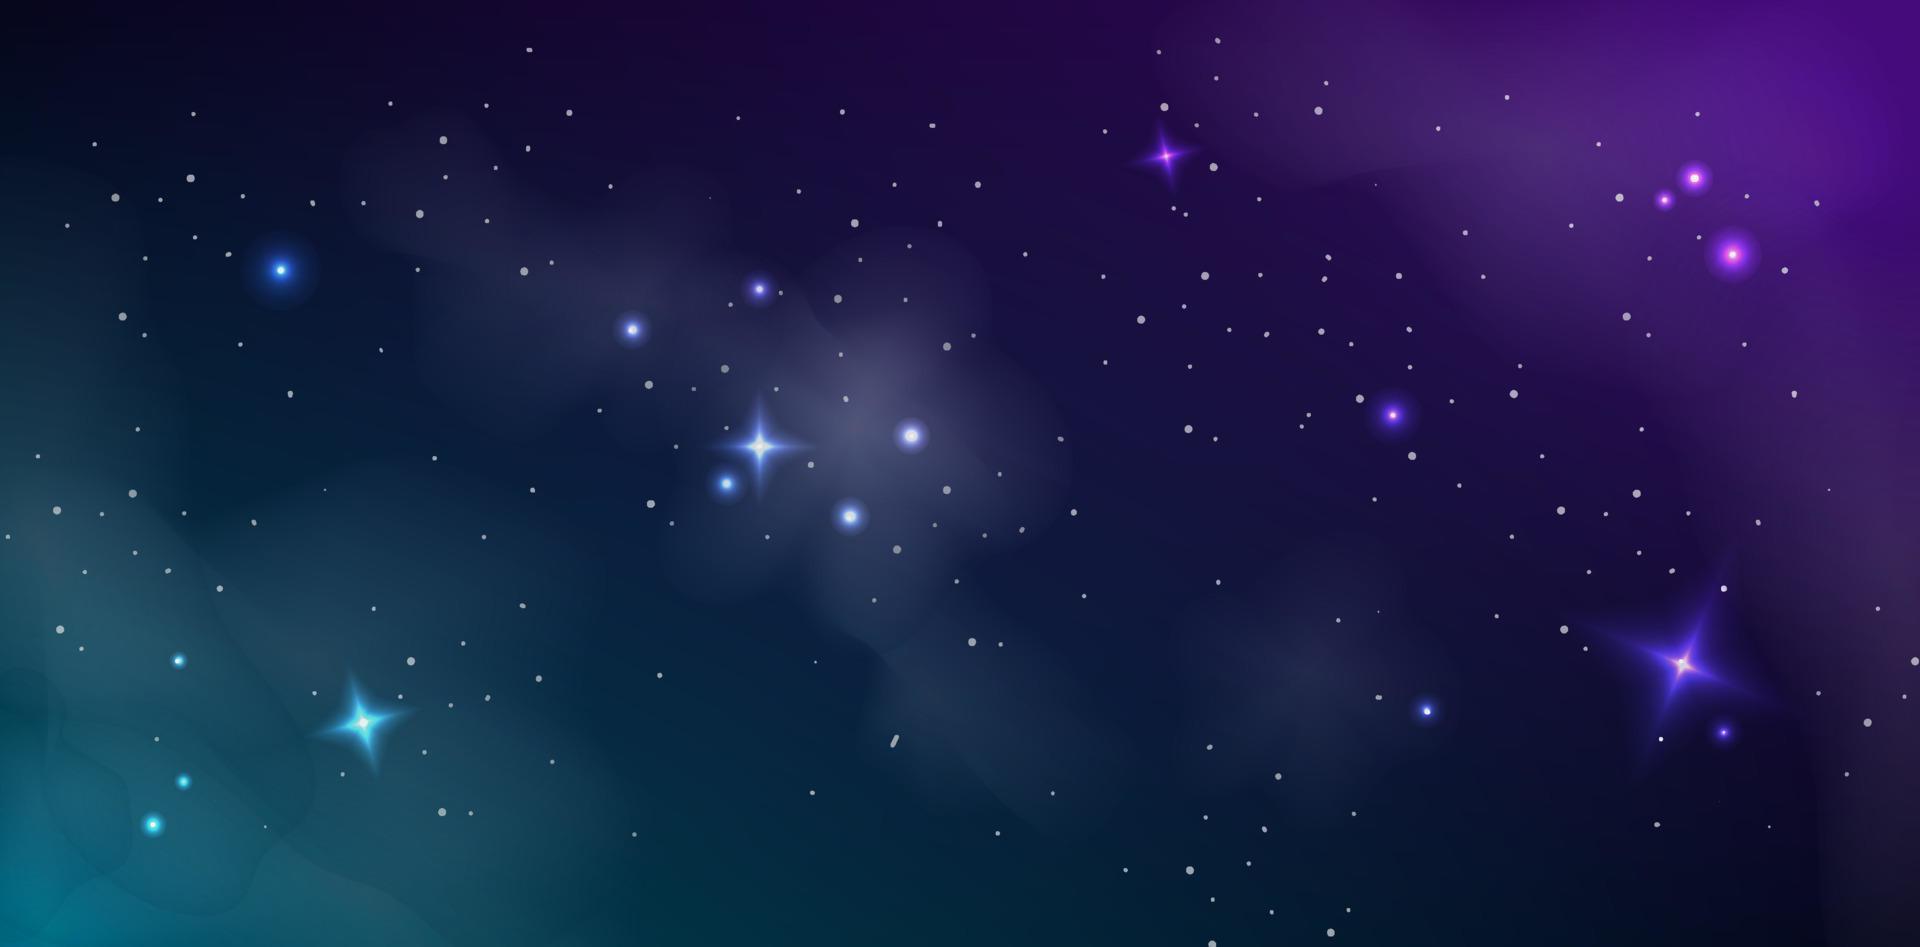 Nebula and star in space wallpaper background vector